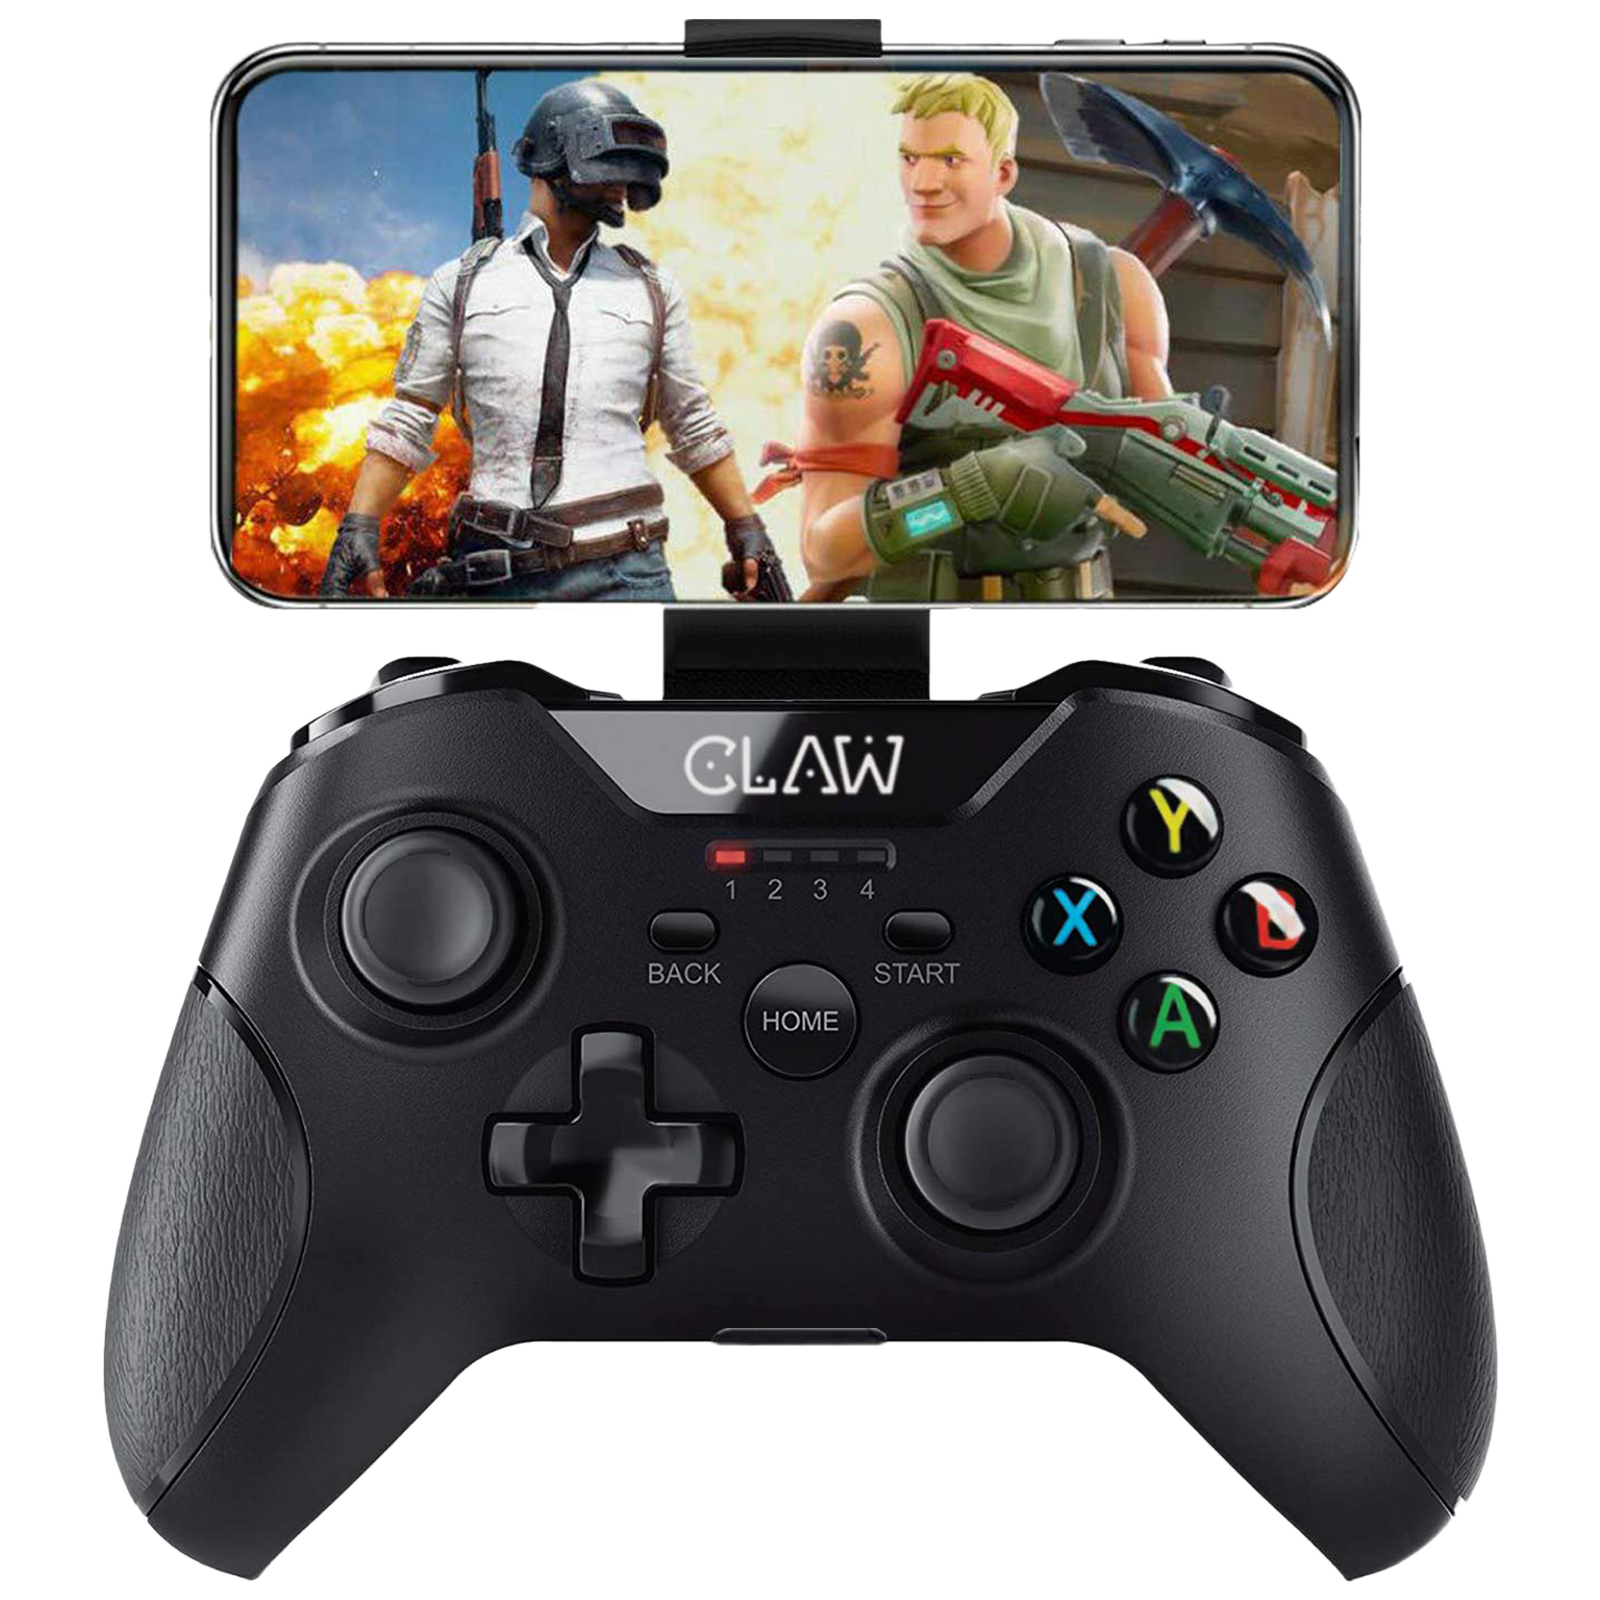 Claw Shoot Mobile Wireless Controller for Windows PC and Laptop (Rubberized Textured Grip, Black)